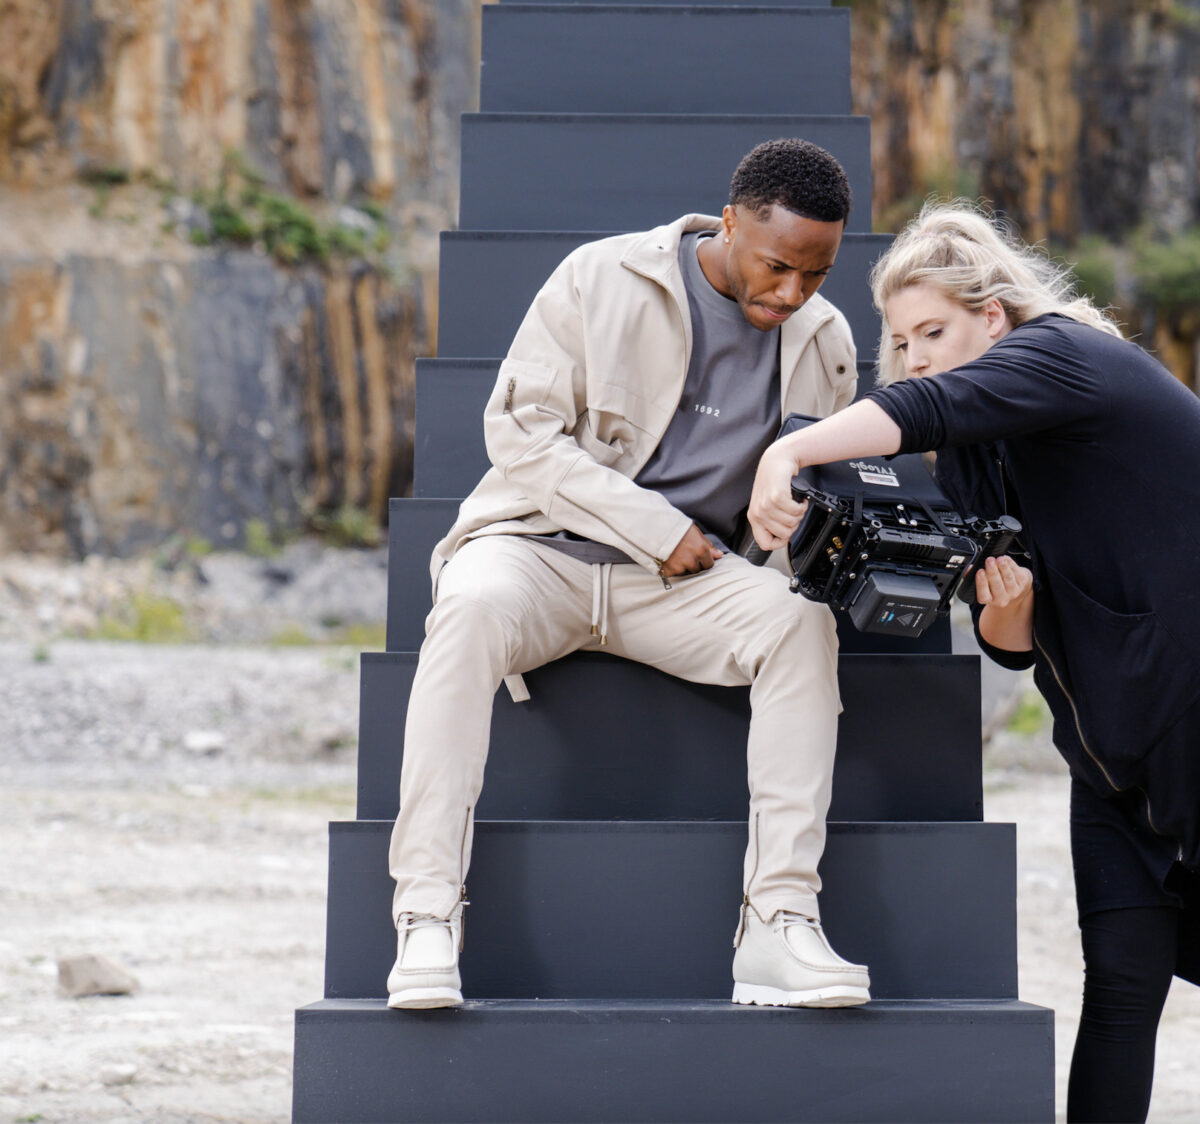 England football star Raheem Sterling has teamed up with music video director Carly Cussen to kick-start a new creative agency, Playmaker Films, depicted here.